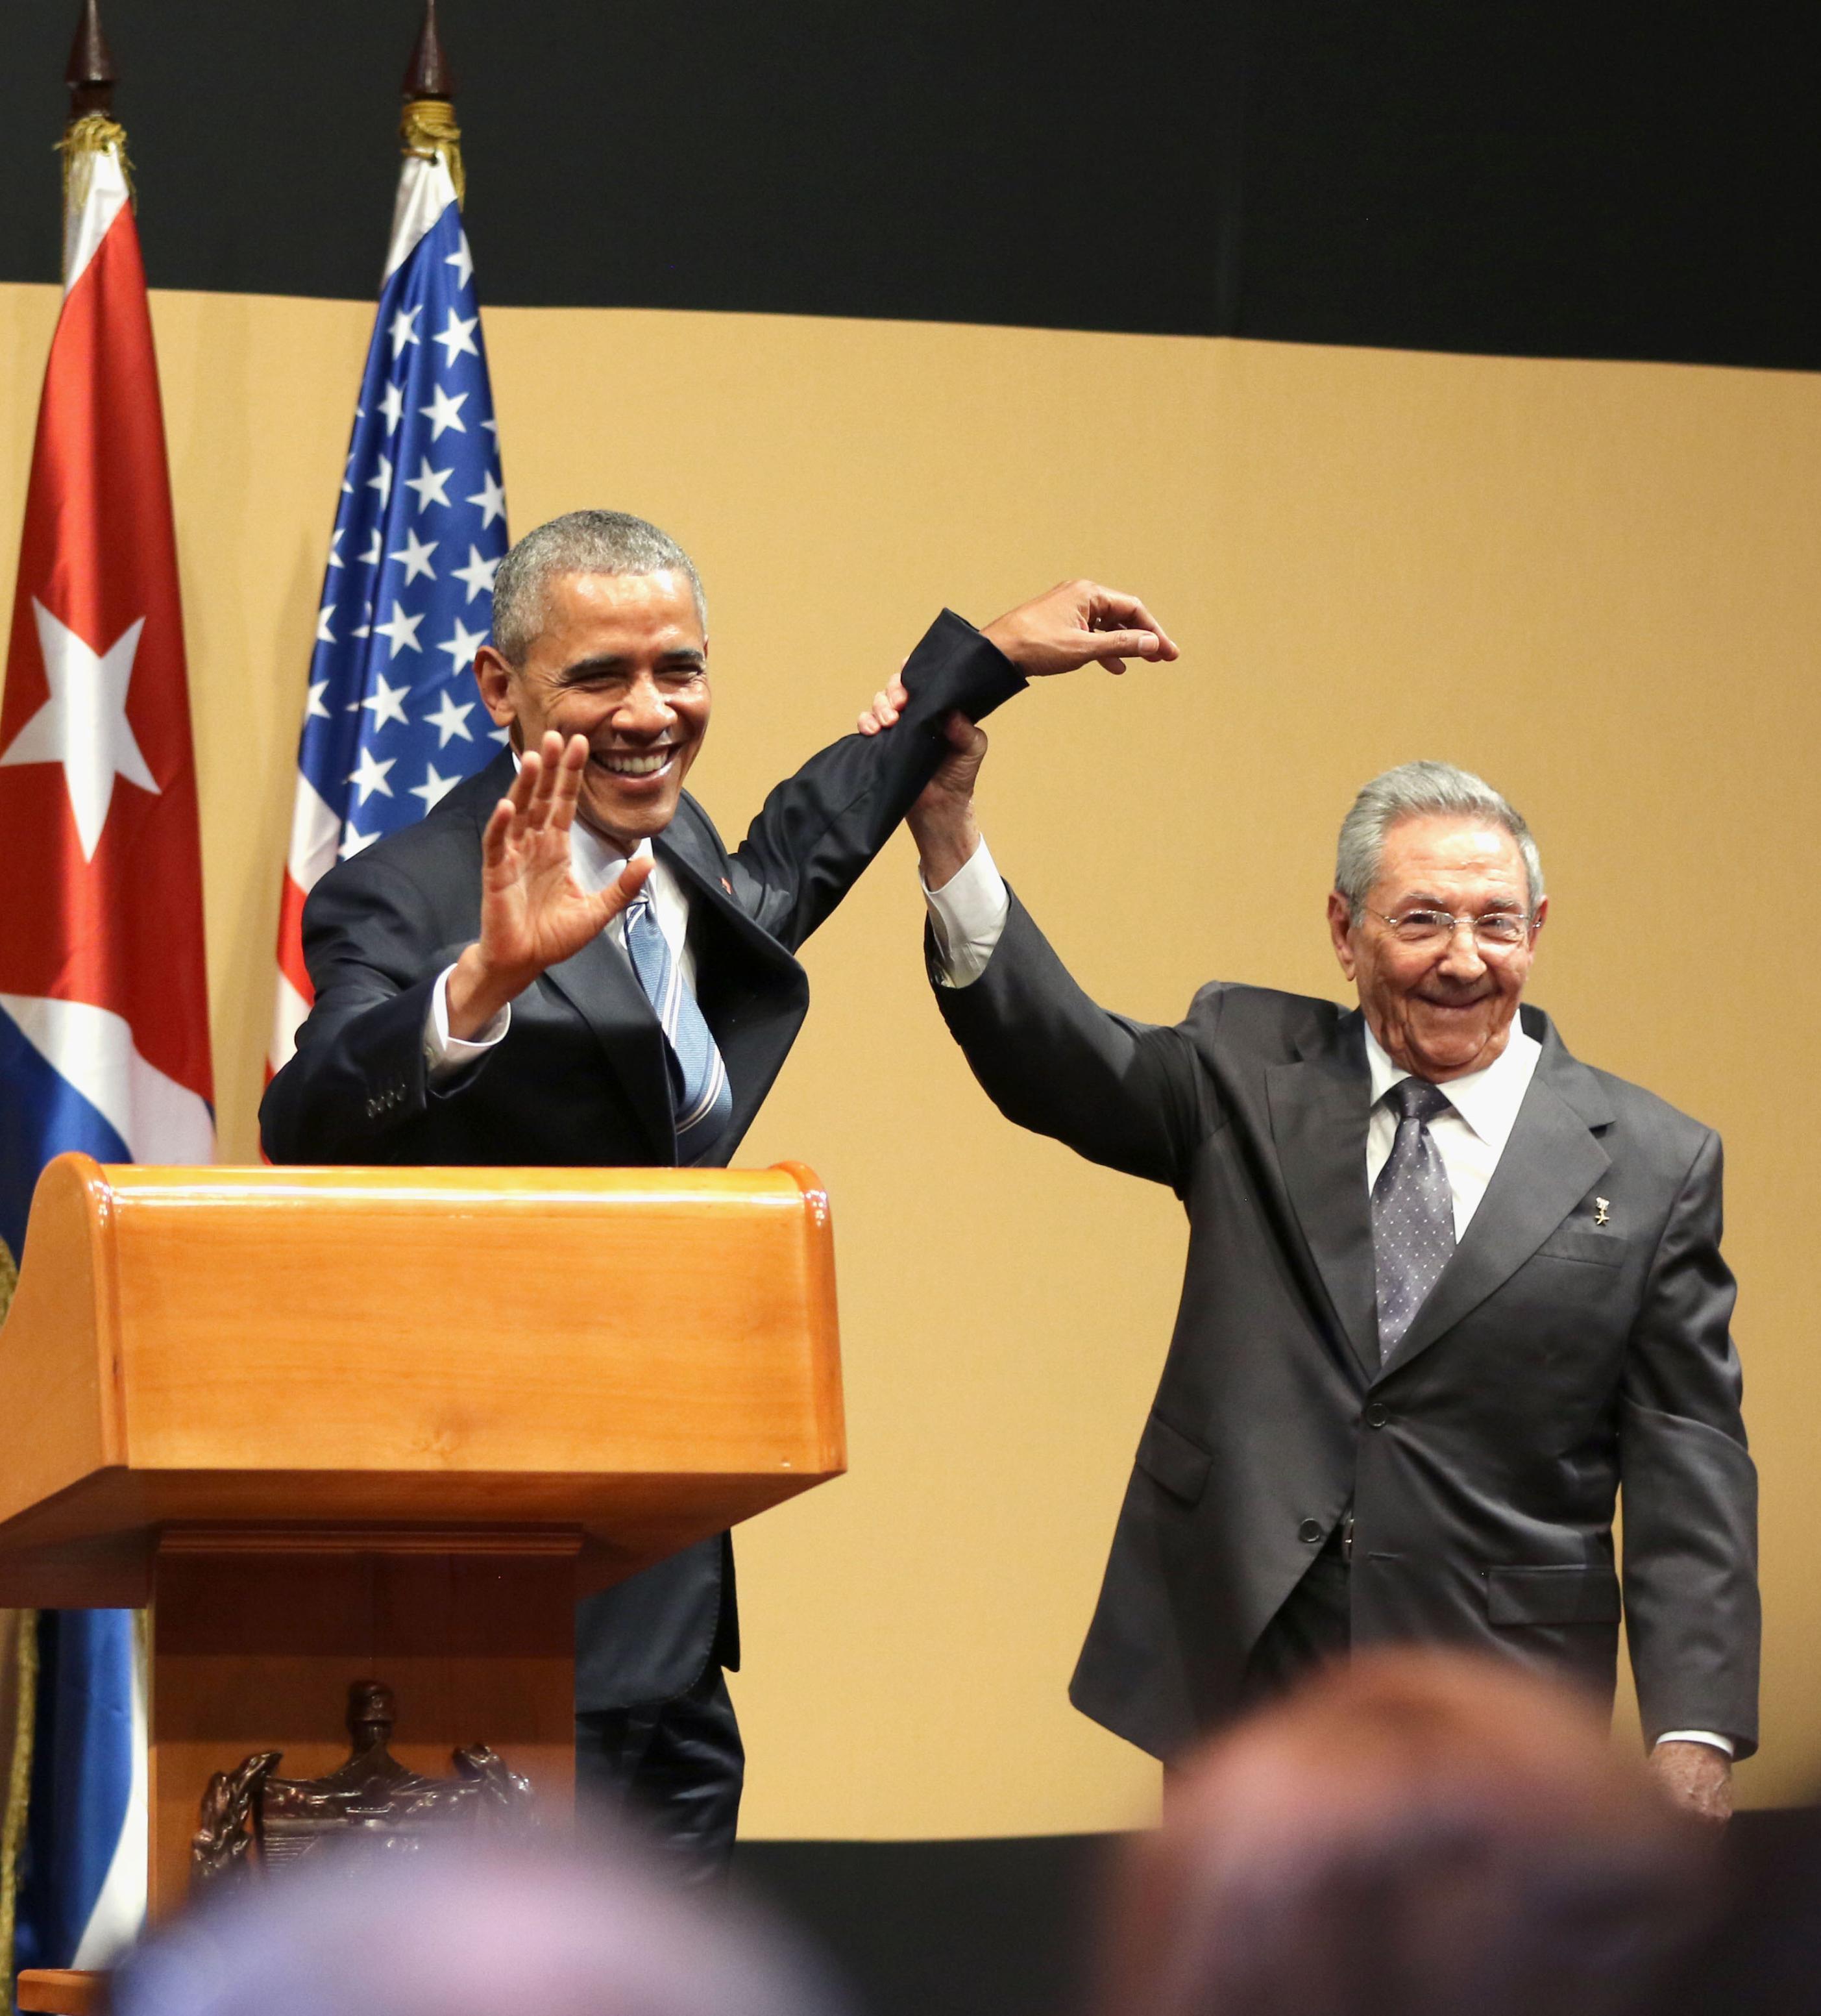 Former US President Barack Obama and former Cuban President Raul Castro during the historic Cuba visit on March 21, 2016, in Havana | Source: Getty Images